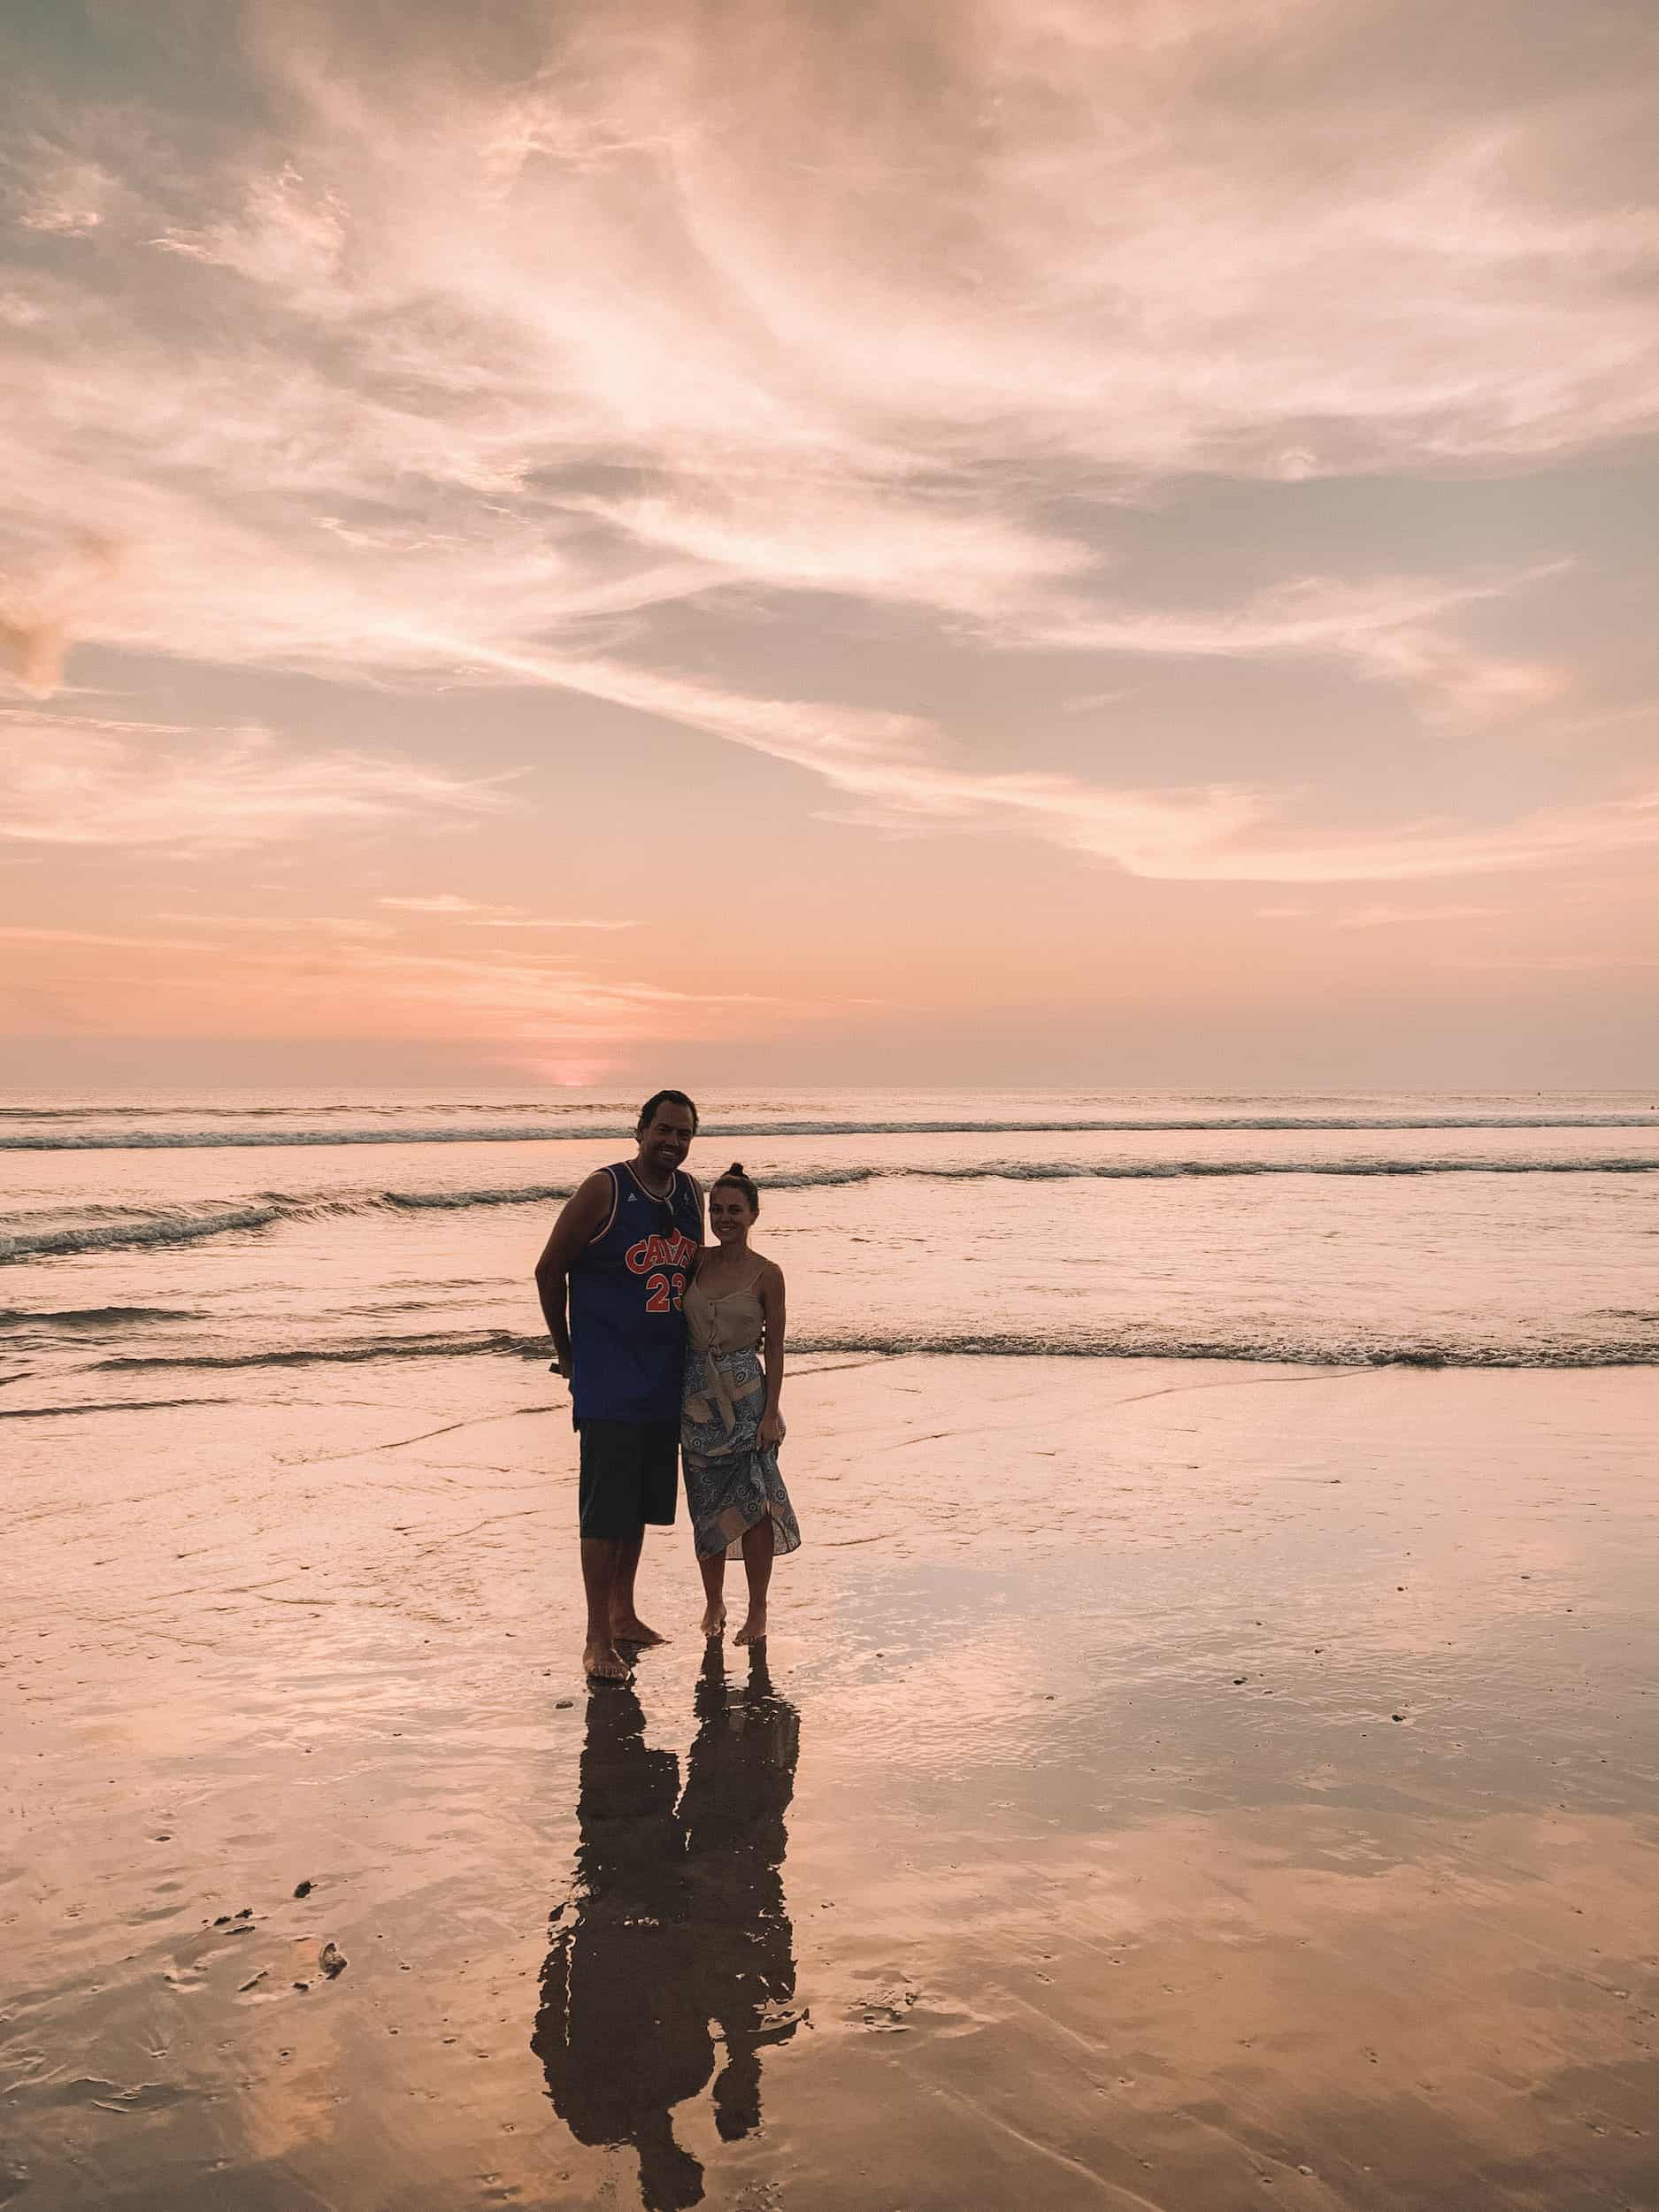 A peach colored sunset shines behind a man and a woman on the beach in Bali